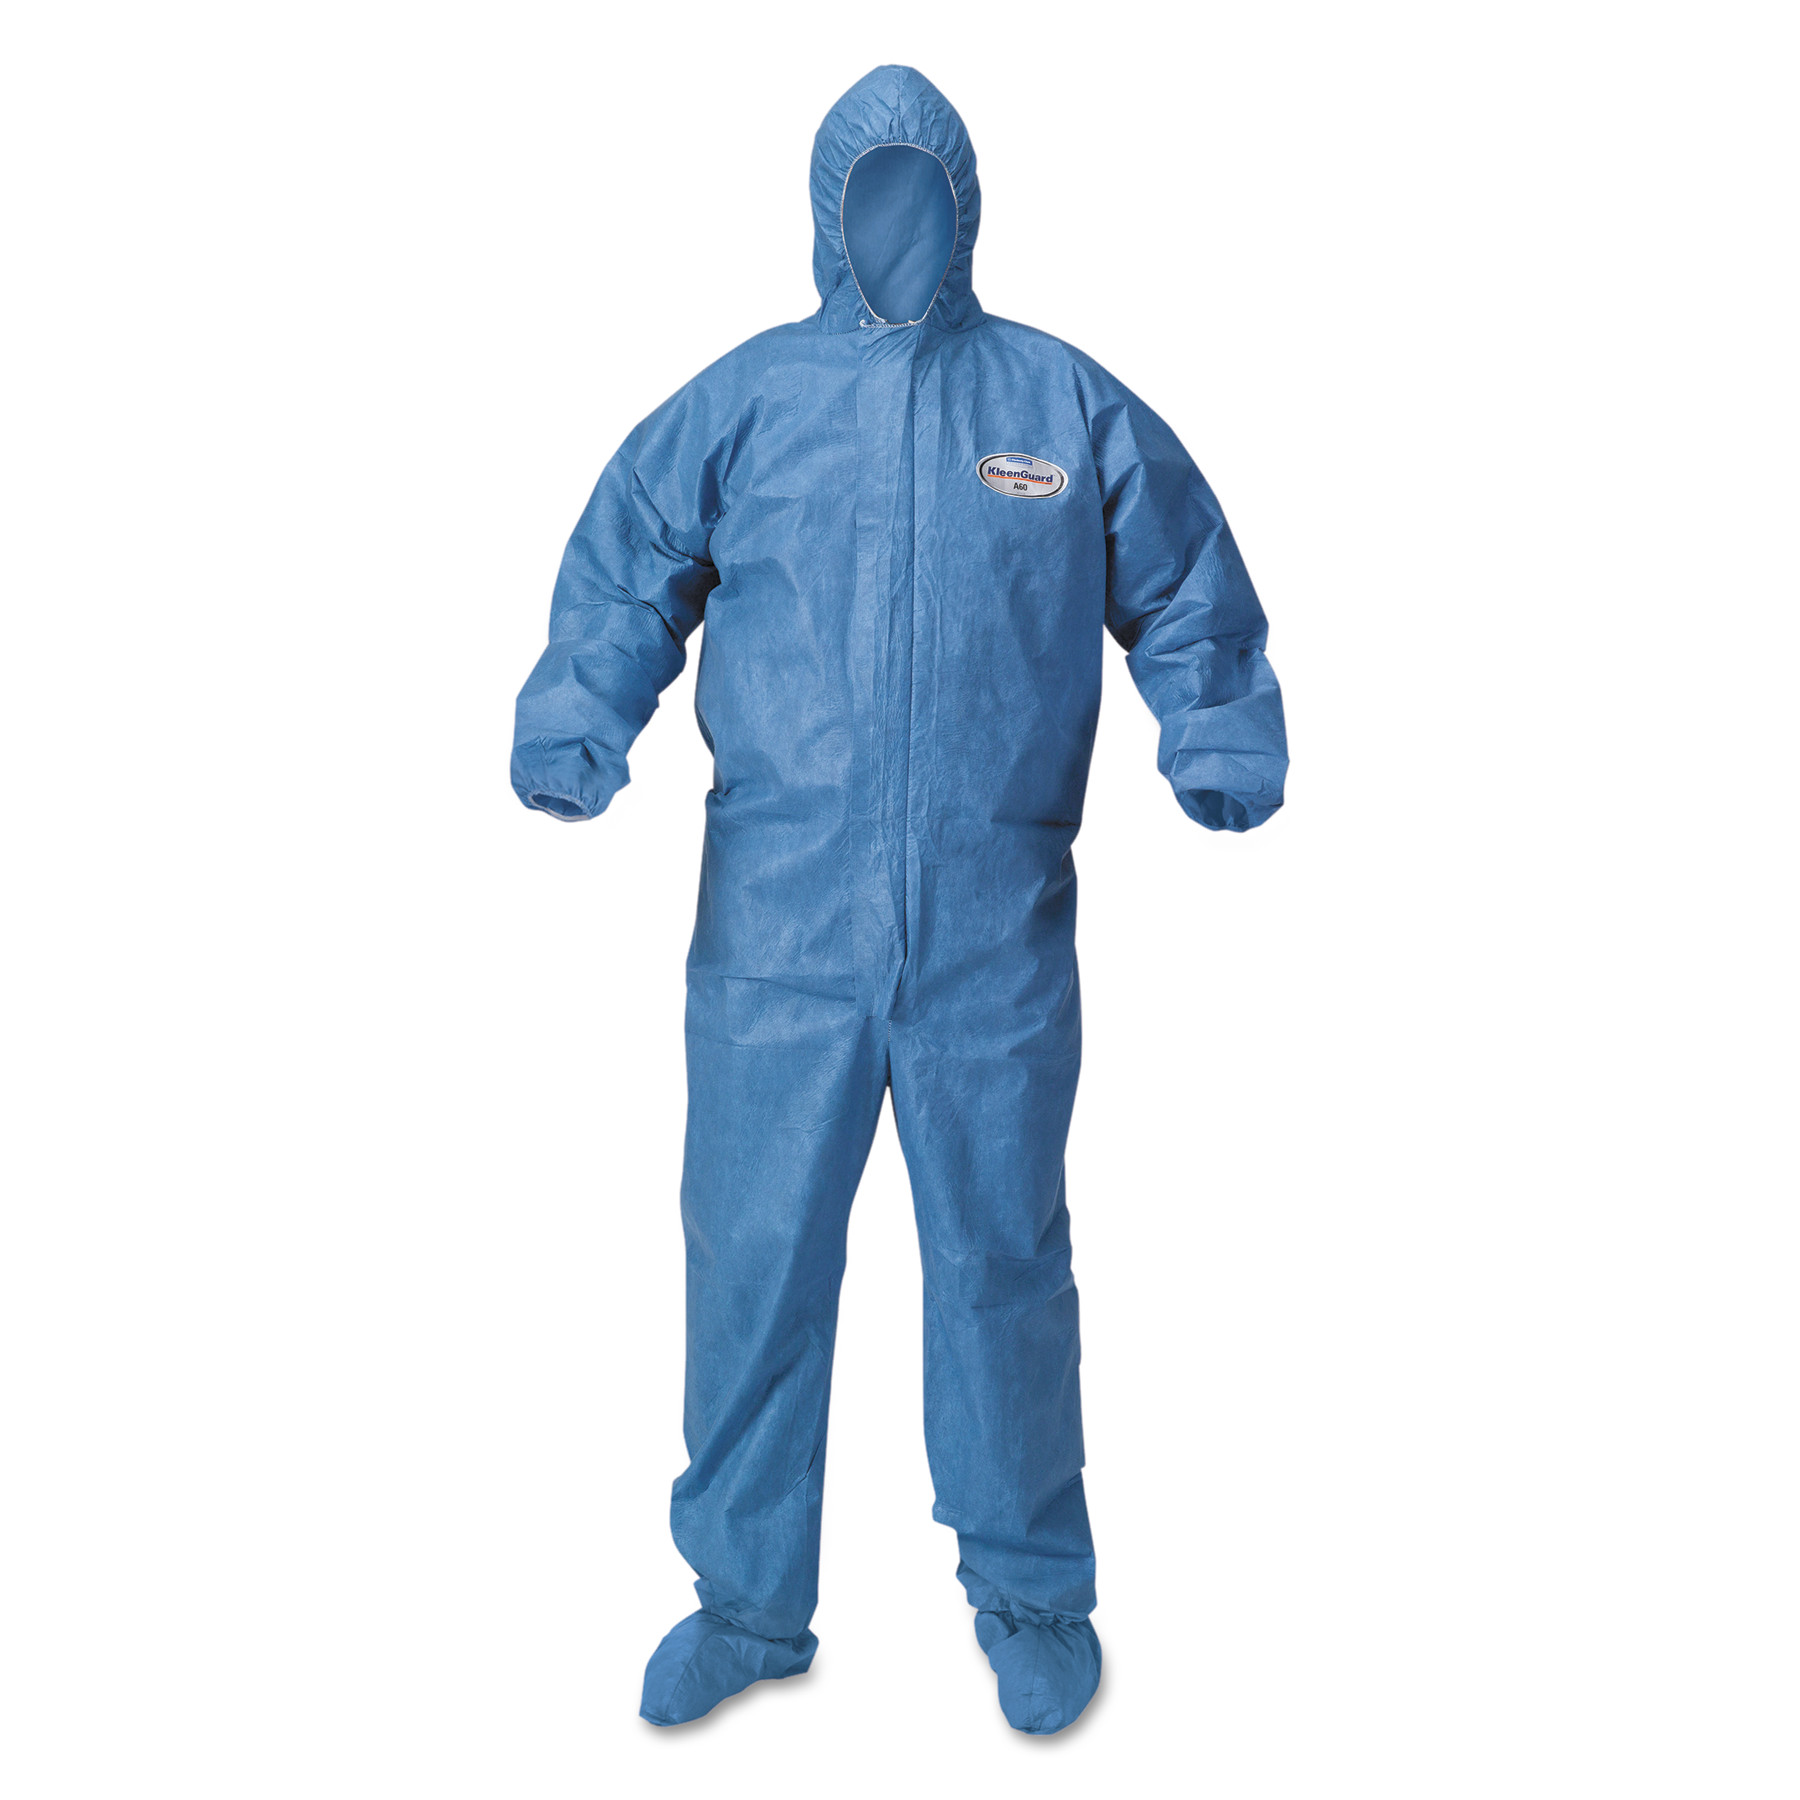 A60 Blood and Chemical Splash Protection Coveralls, 3X-Large, Blue, 20/Case